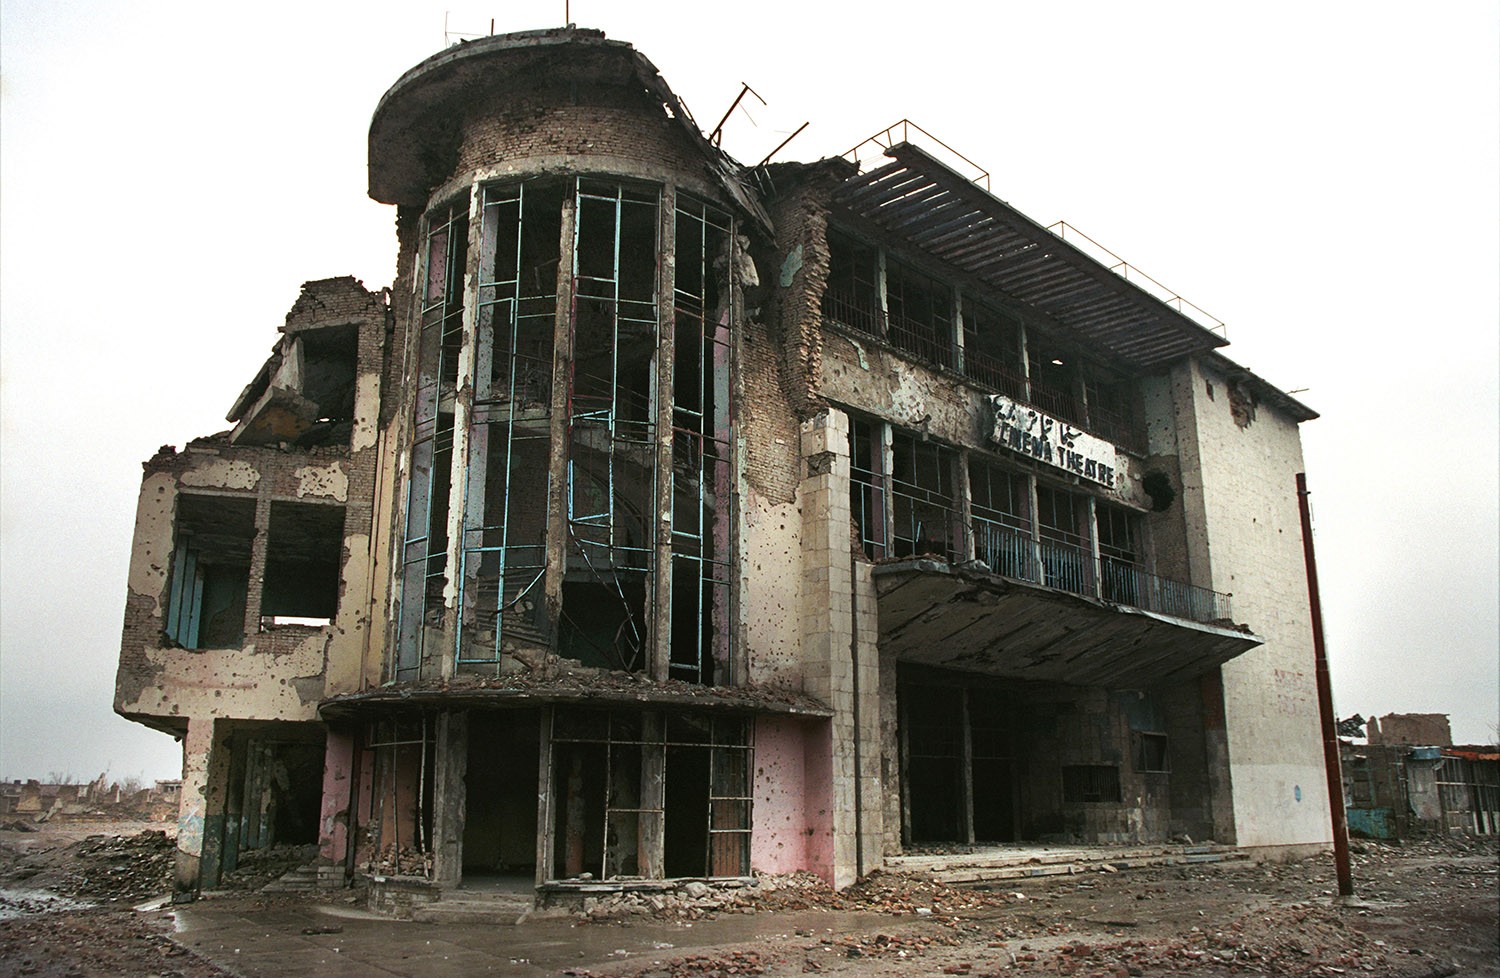 A destroyed theater in Kabul.